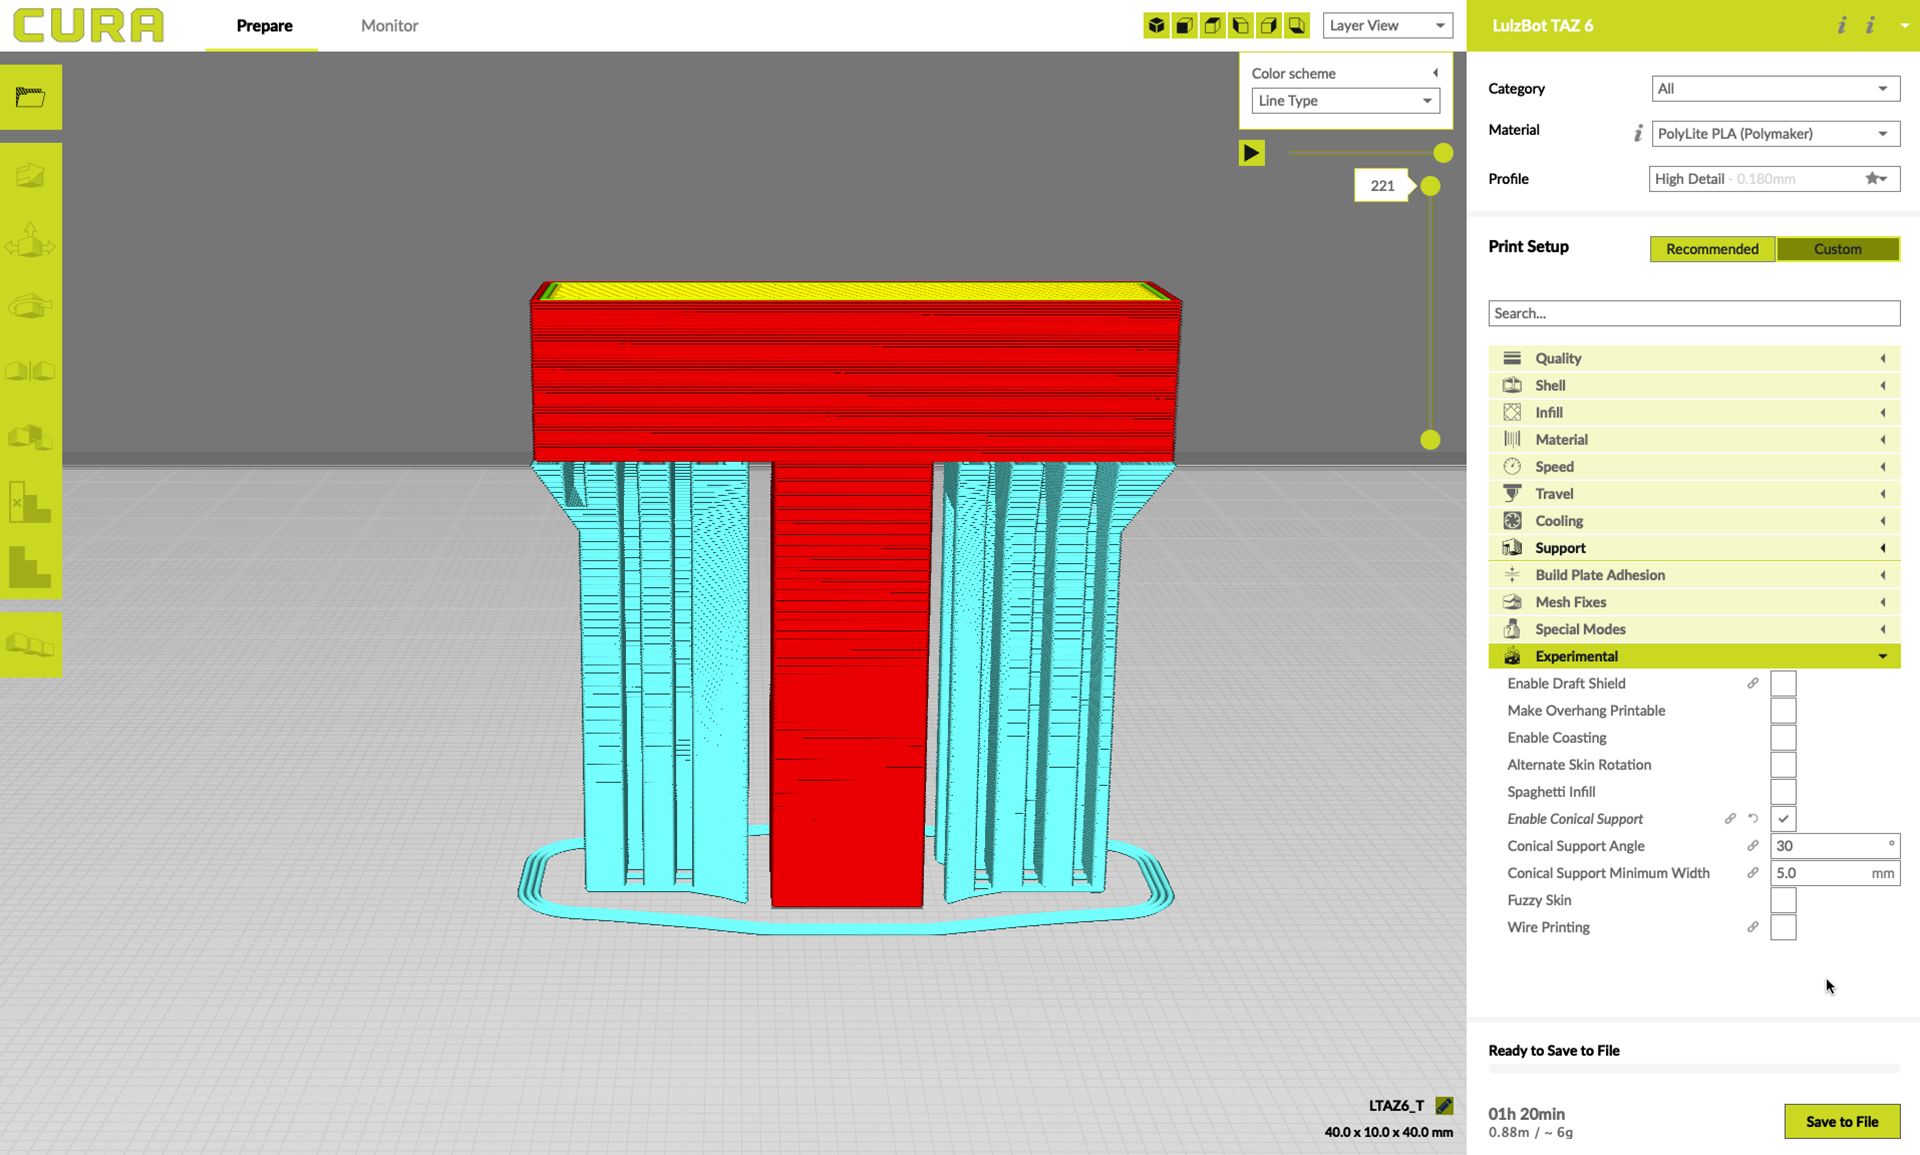 Conical supports designed in Lulzbot Cura's slicer software